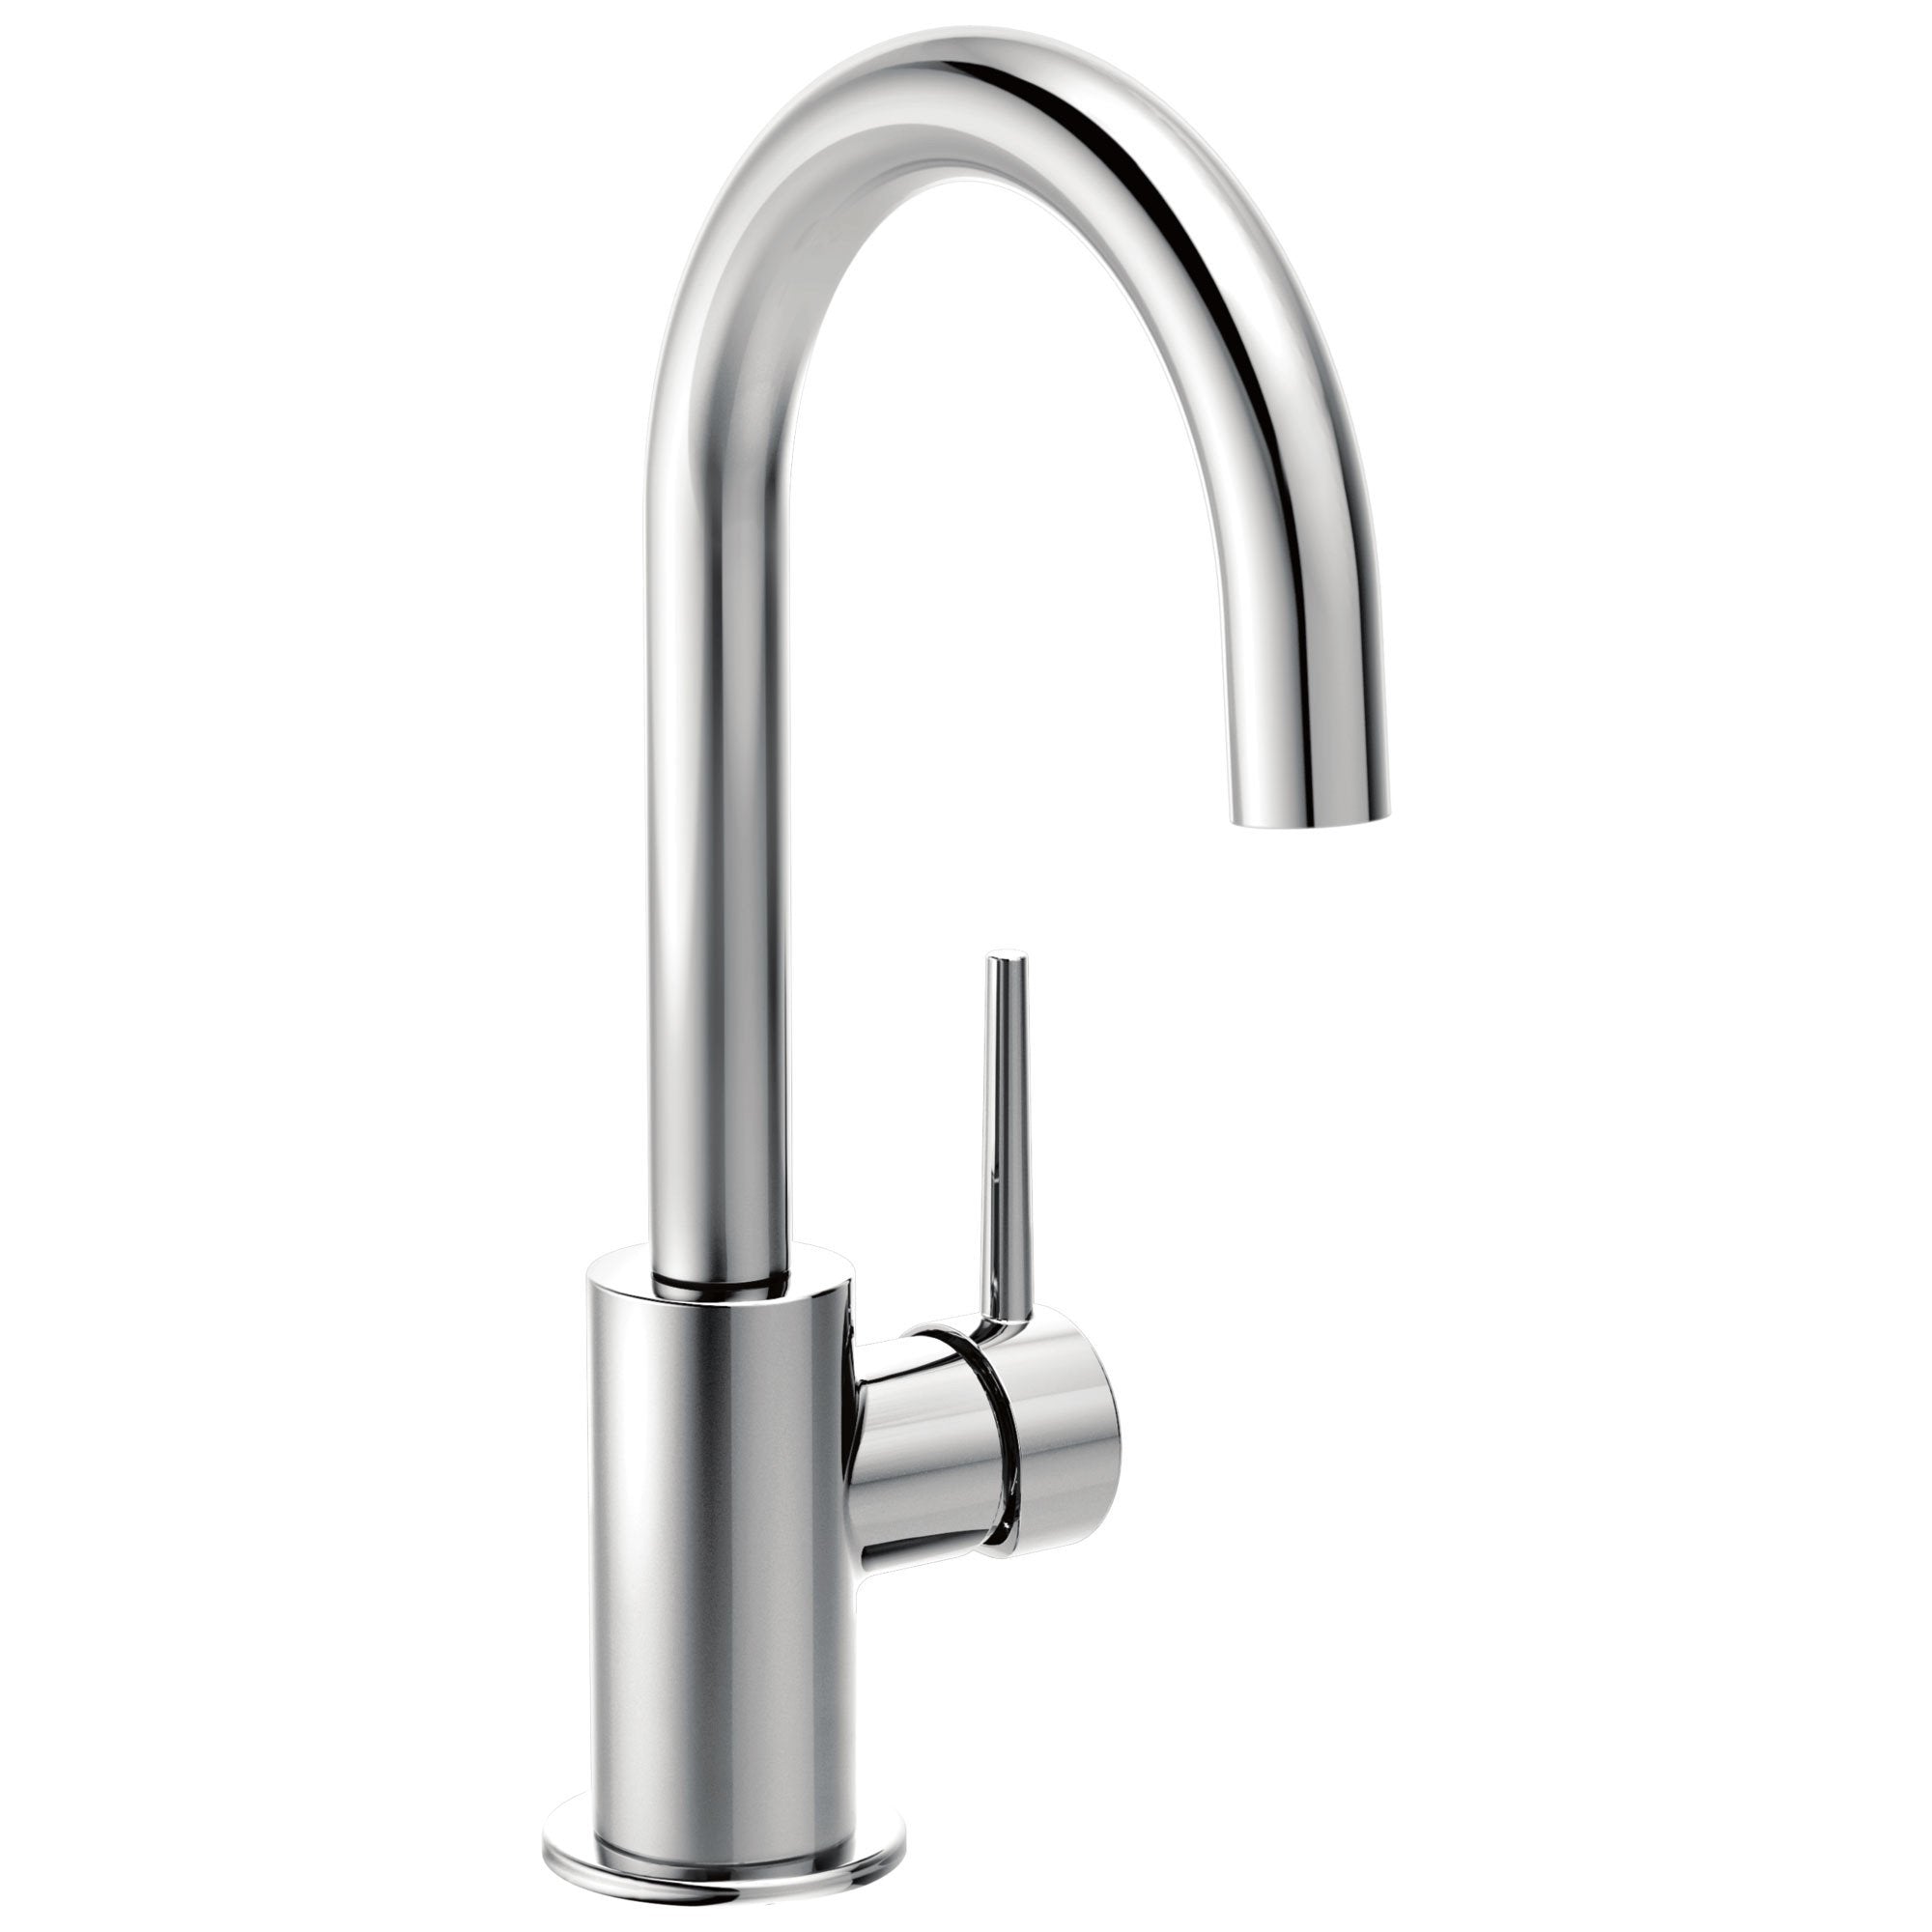 Delta Trinsic Collection Chrome Finish Single Lever Handle 360-degree Swivel Spout Modern Bar Sink Faucet 729160